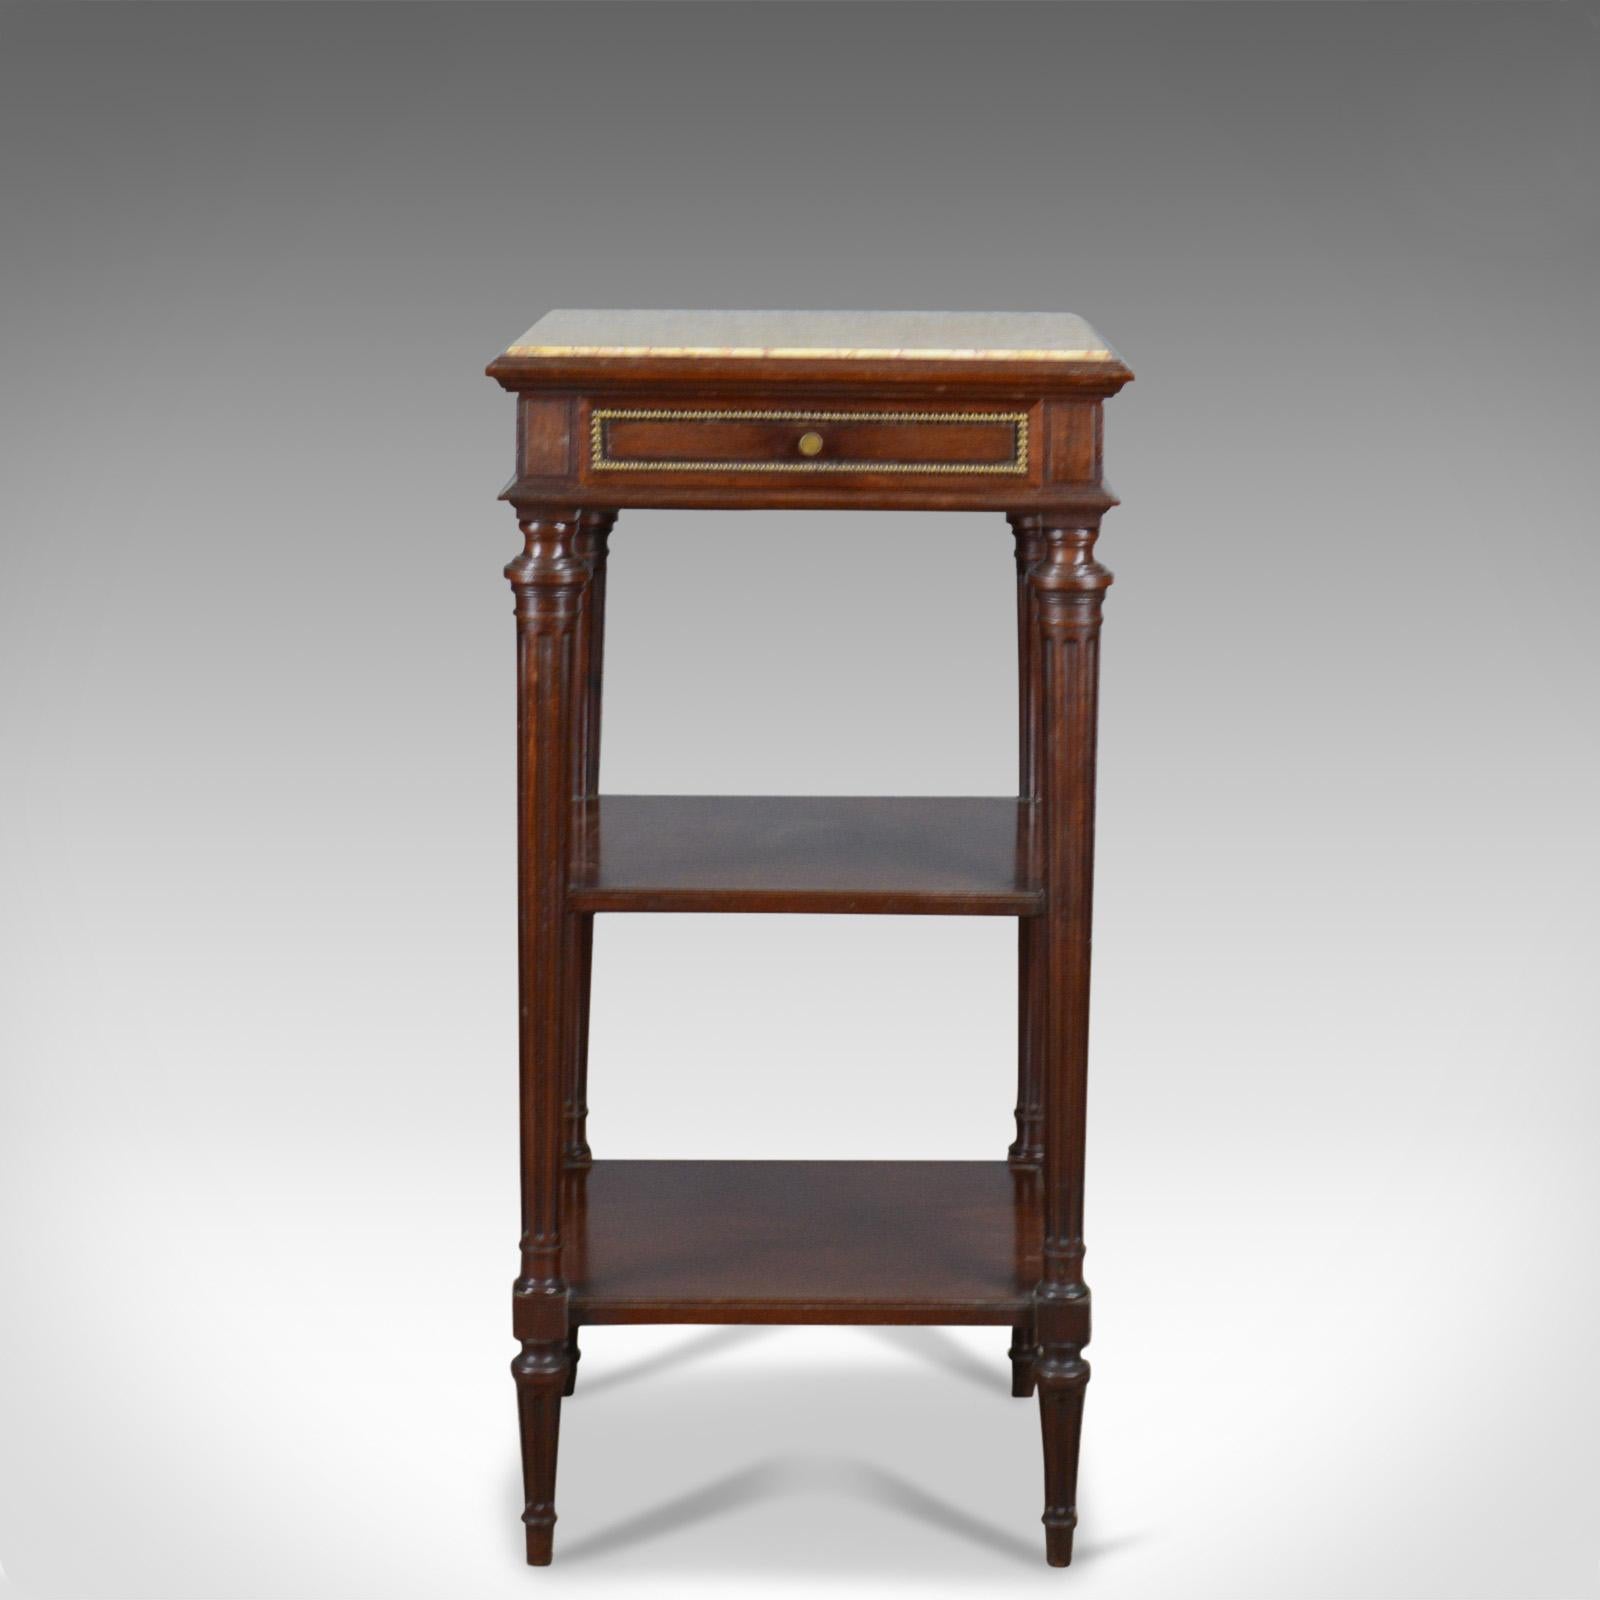 This is an antique French, marble top, bedside table. A French, mahogany display table in the Louis XVI taste by renowned cabinet maker Constantin Potheau of Paris and dating to the early 20th century, circa 1910.

Of superior quality by a fine